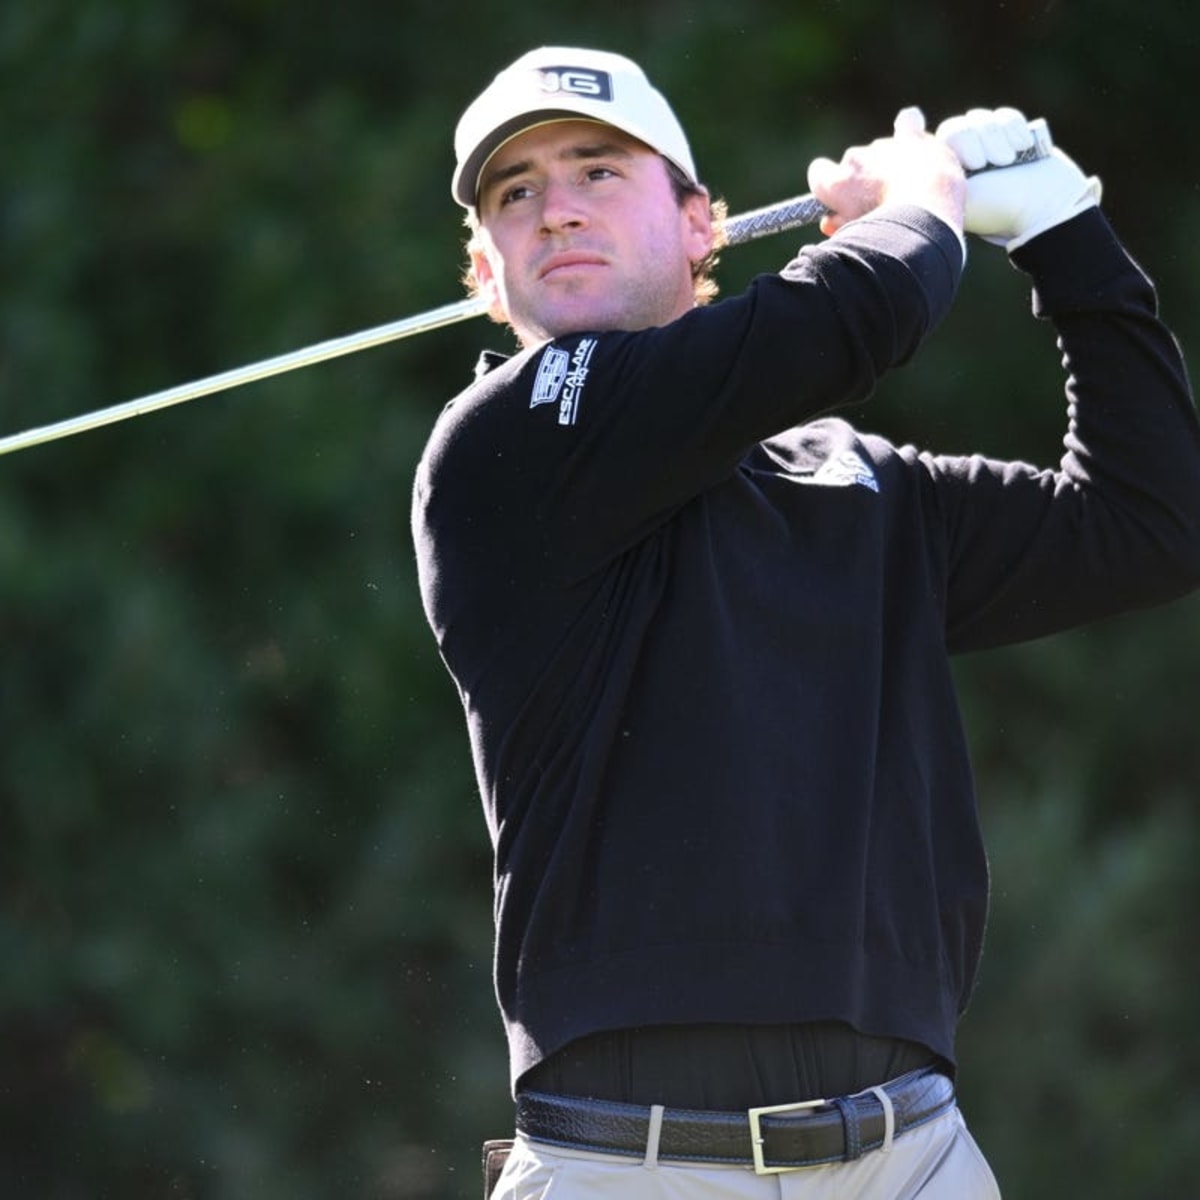 Austin Eckroat at the Valspar Championship Live Stream, TV Channel March 15 - 18 - How to Watch and Stream Major League and College Sports